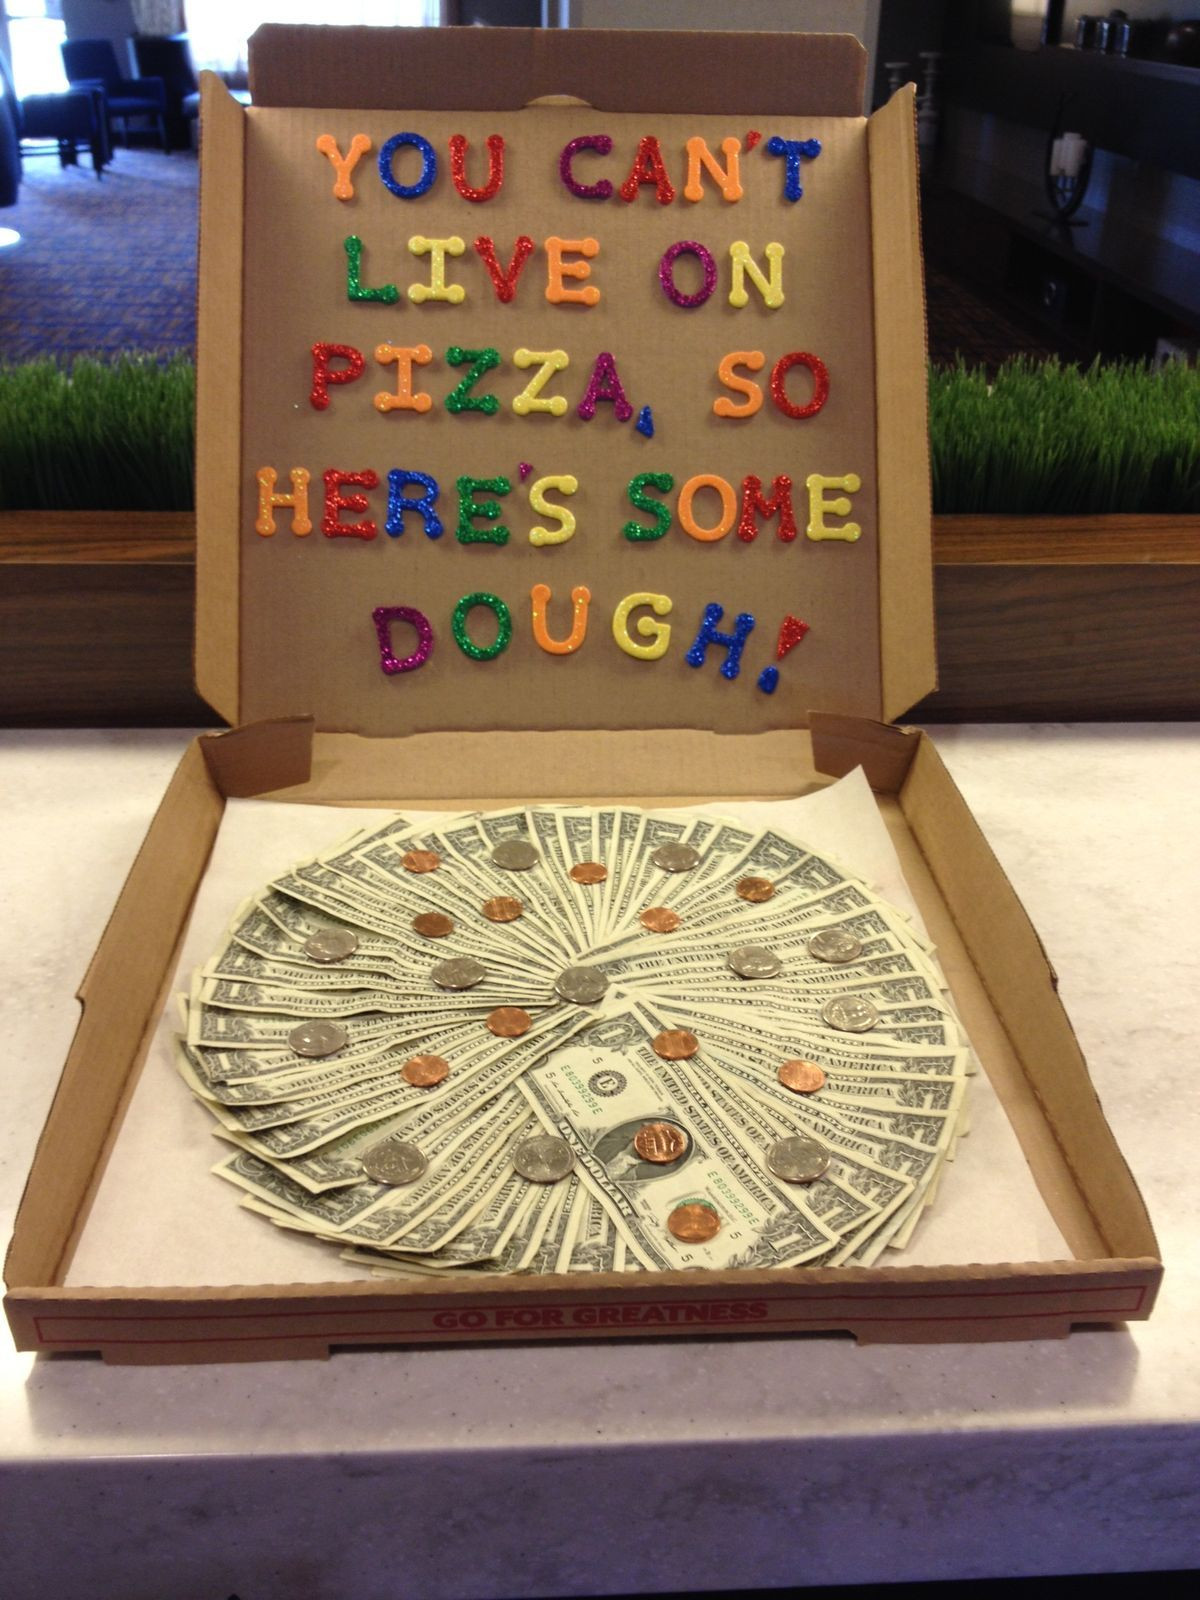 High School Graduation Gift Ideas
 You can t live on pizza so here s some dough fun way